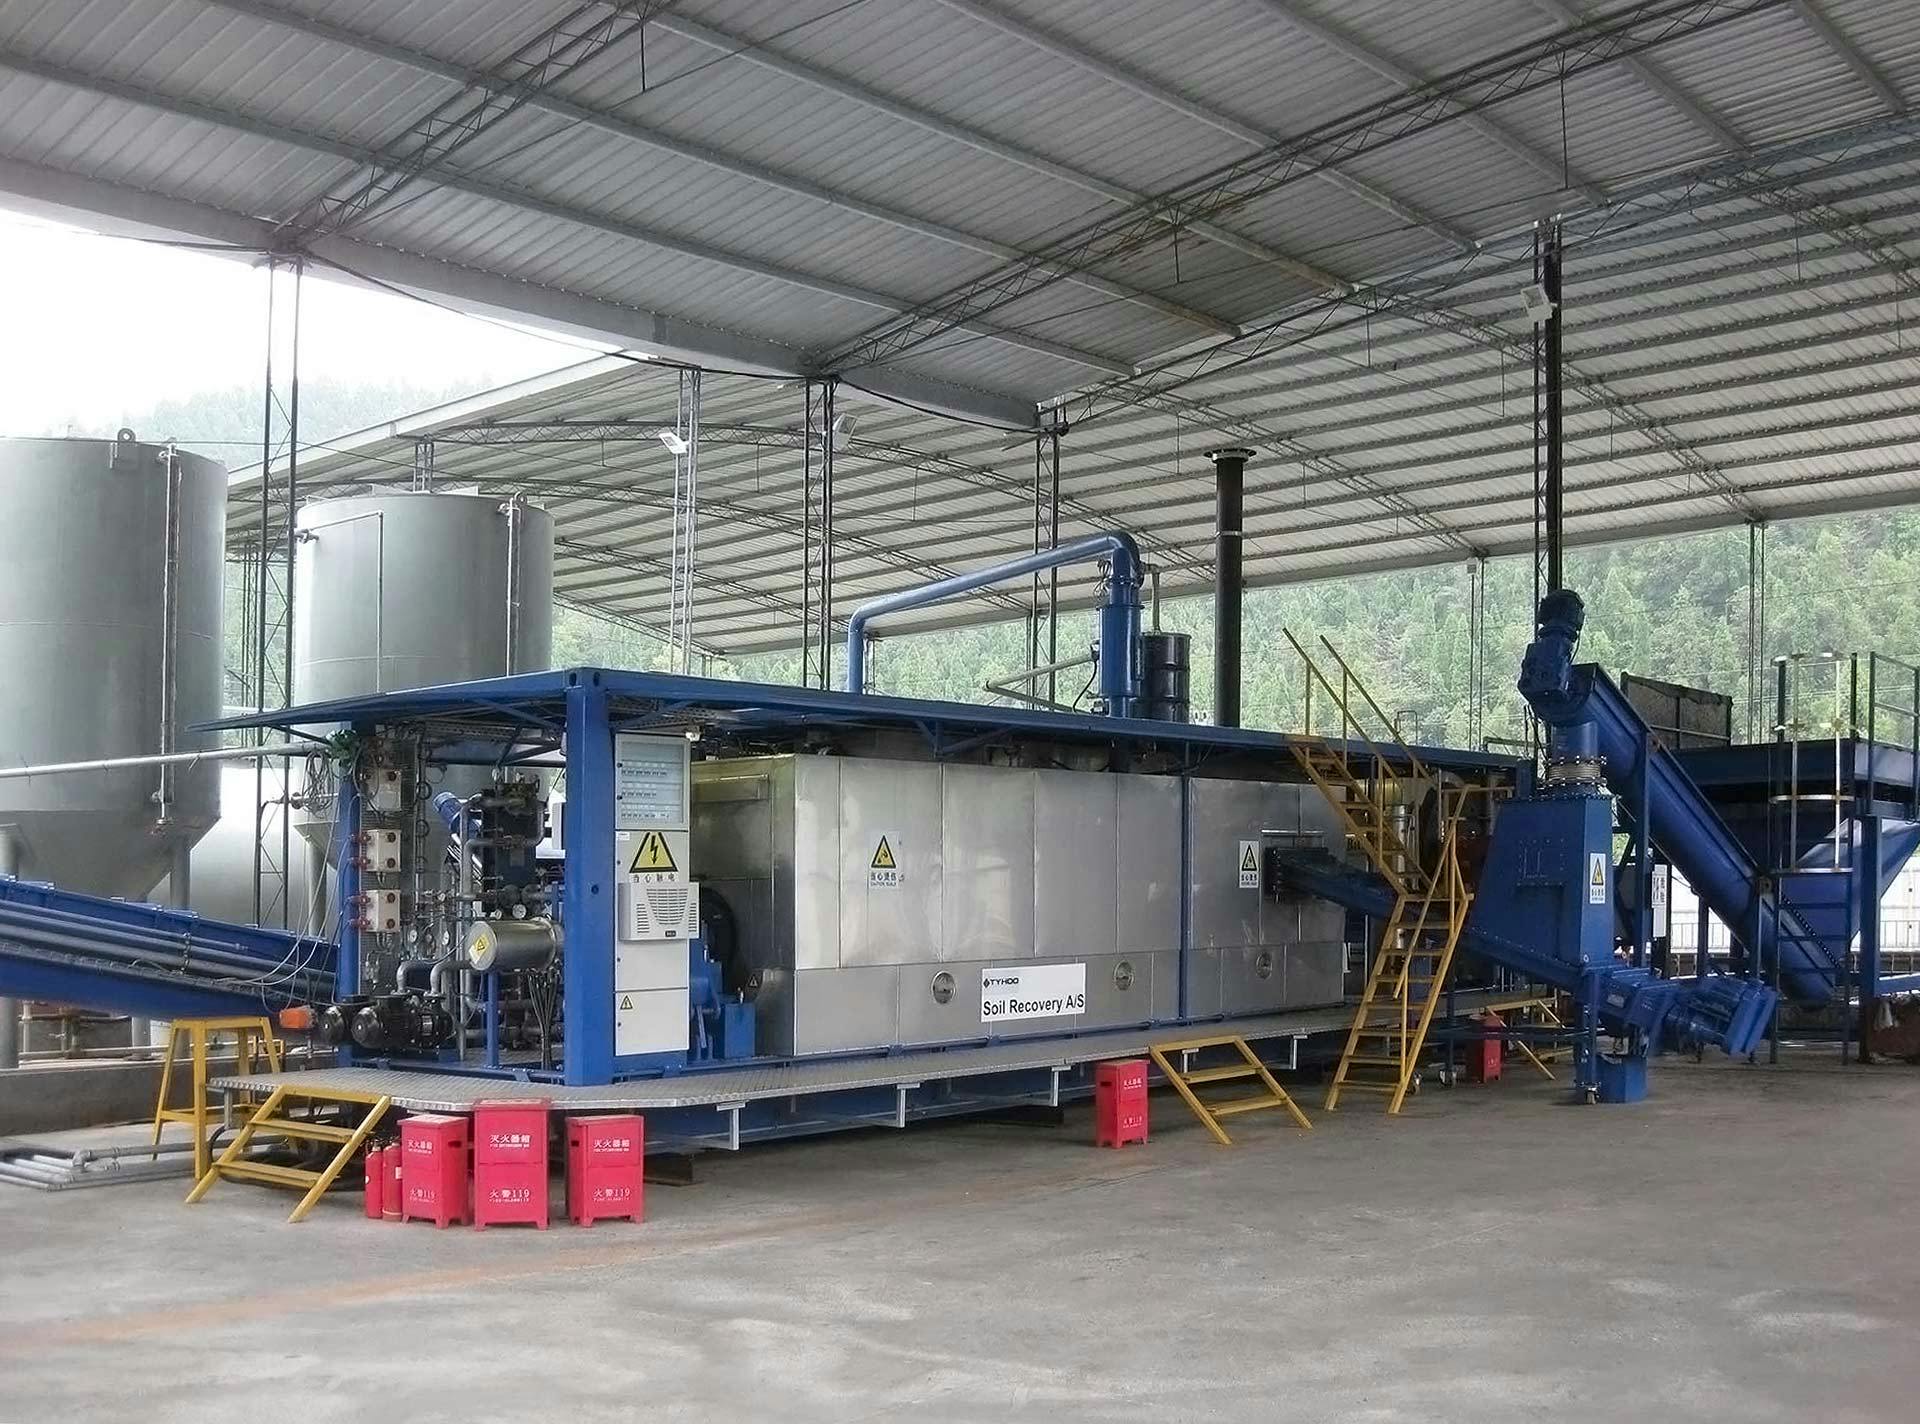 Hot Oil Thermal Desorption Unit front